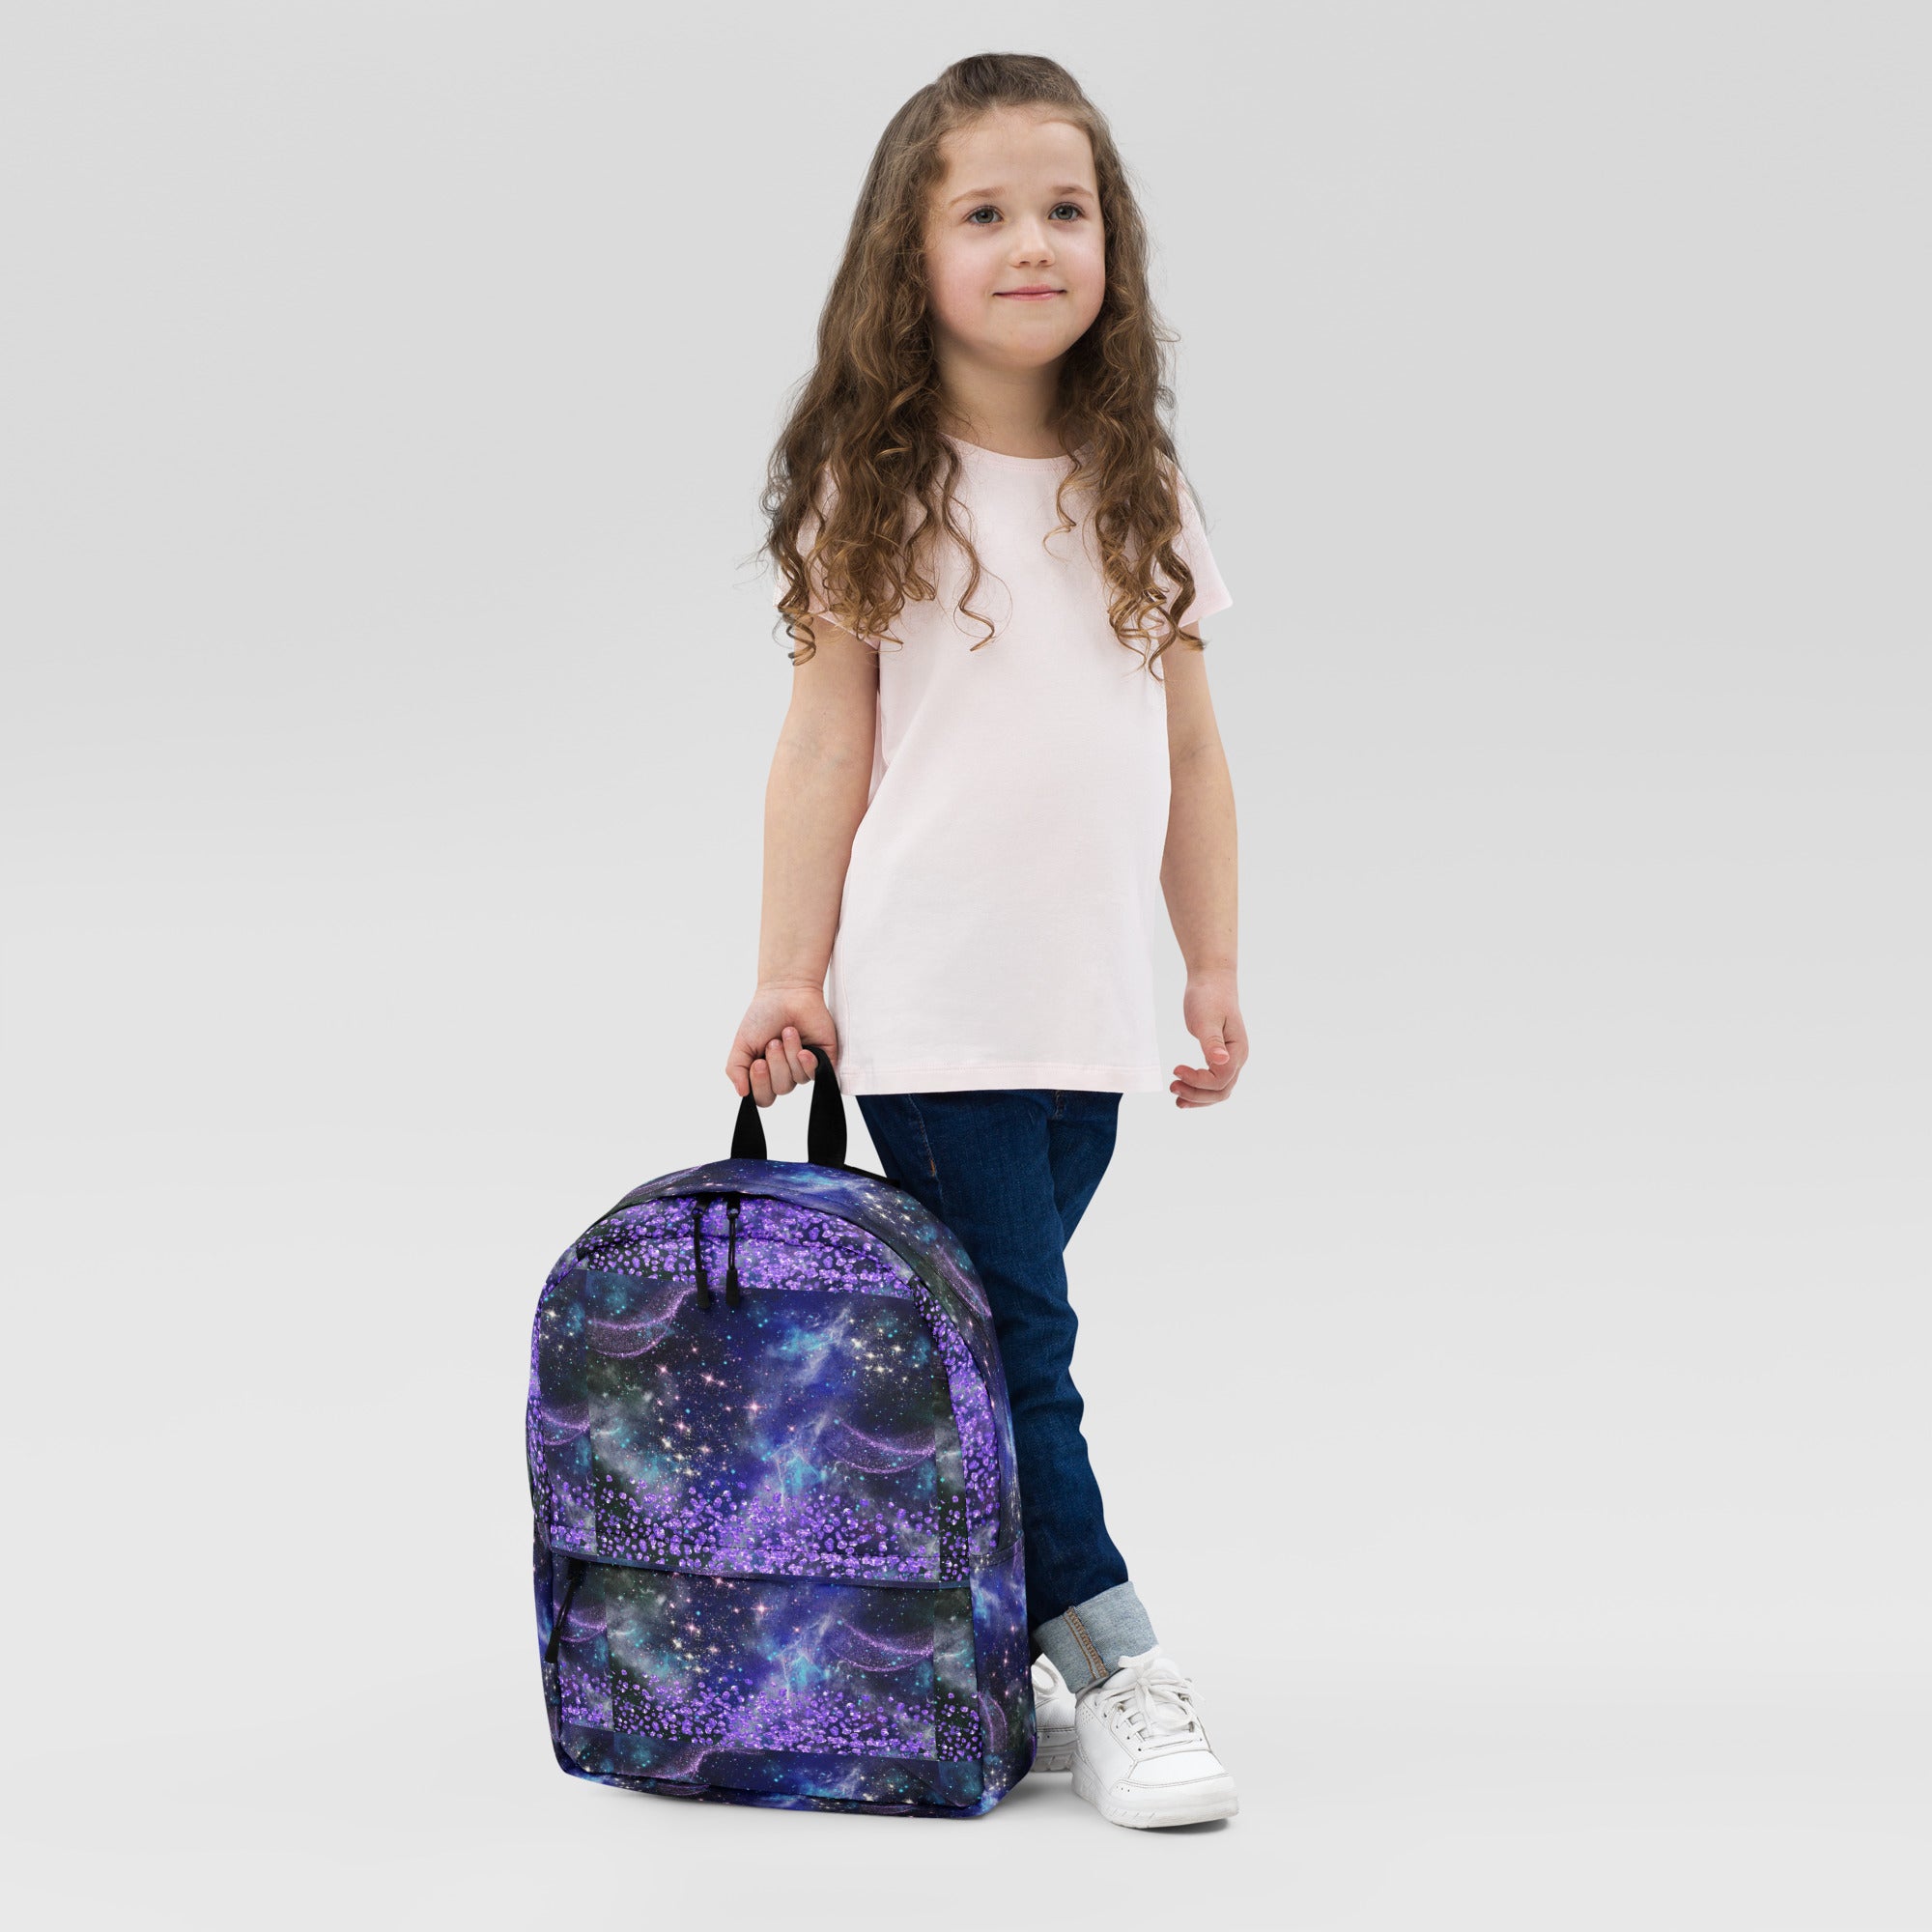 Backpack. Back to School, Kids, Adults